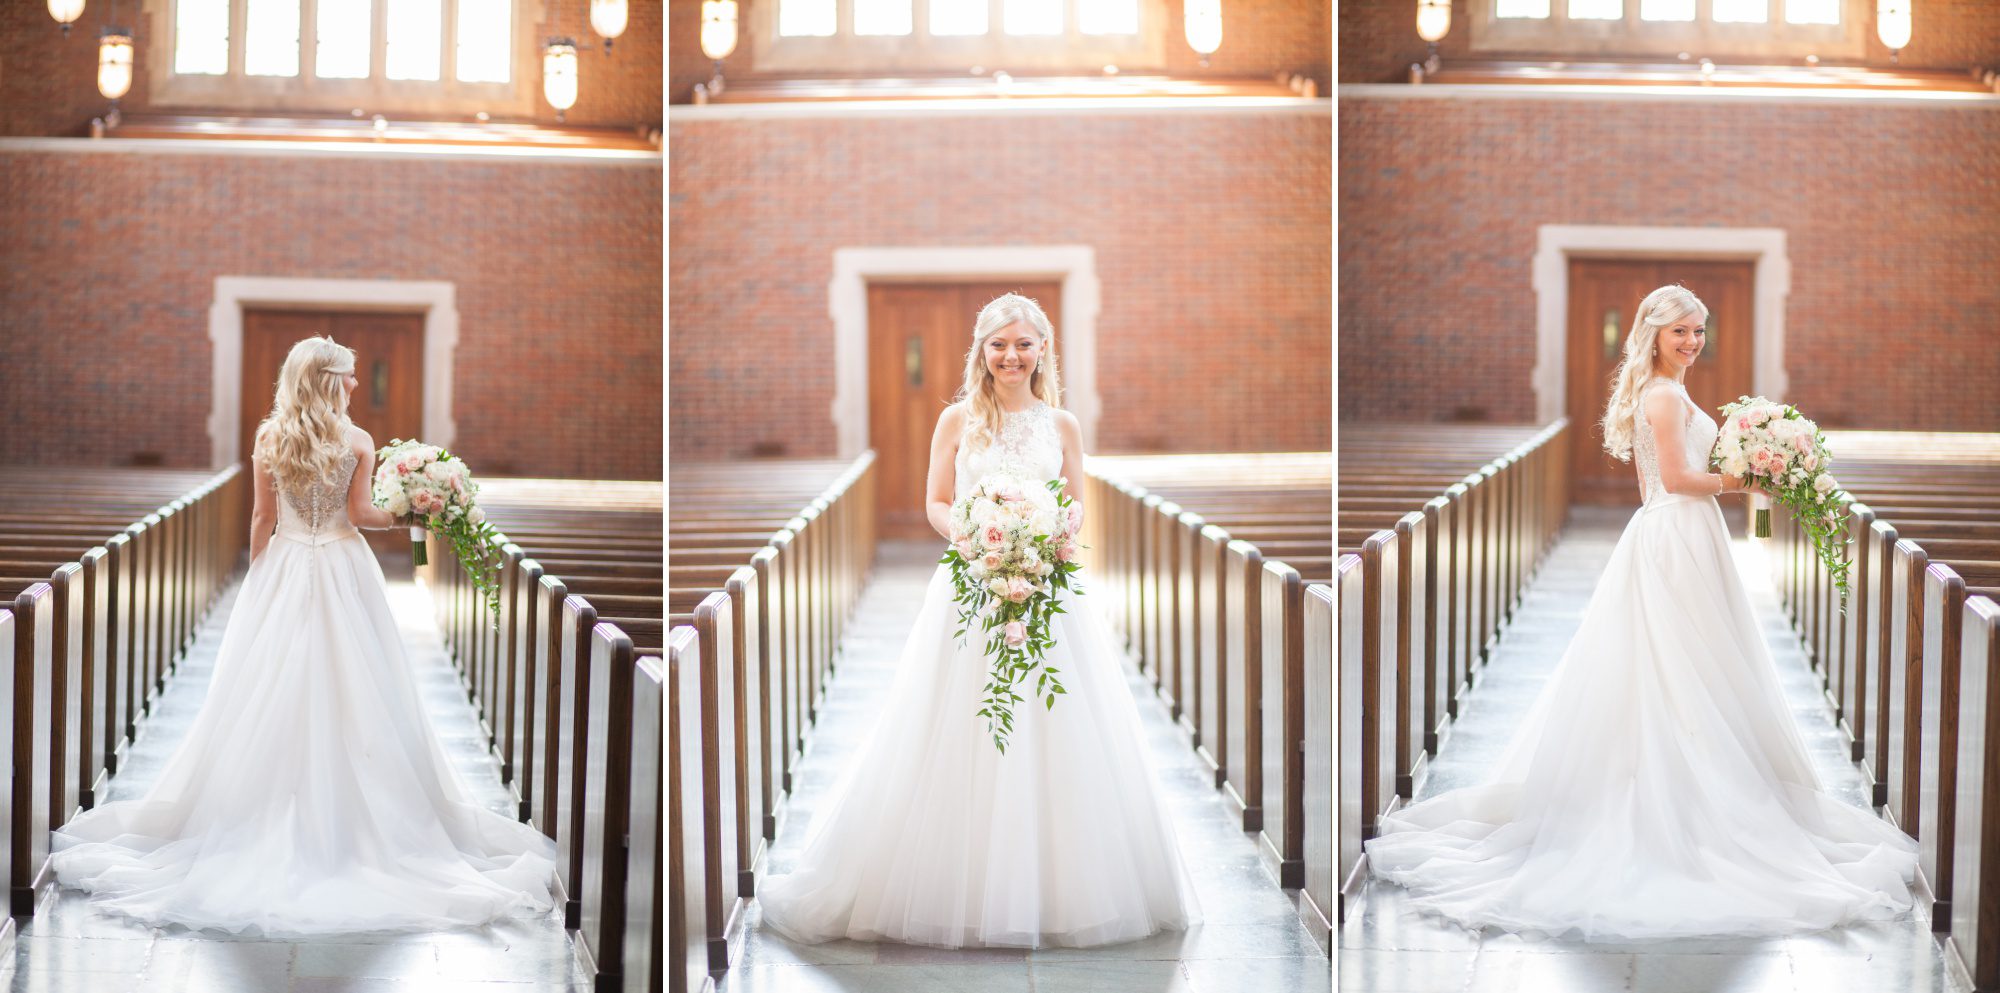 Bride with her bouquet and wedding gown - Wightman Chapel at Scarritt Bennett before summer wedding ceremony in Nashville, TN. Photography by Krista Lee Photography.